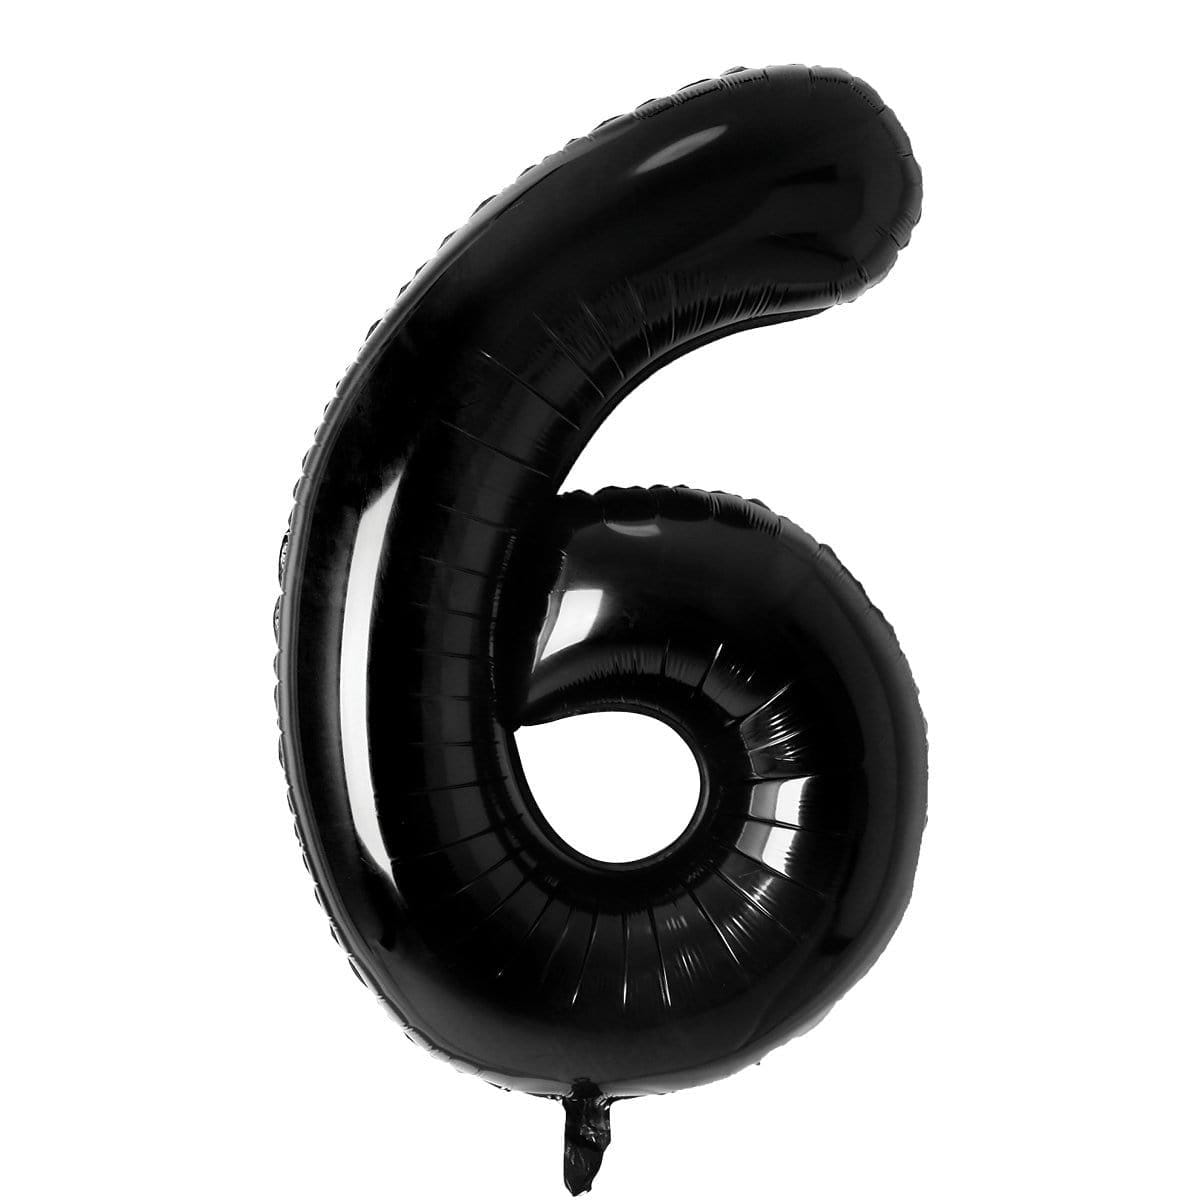 Buy Balloons Black Number 6 Foil Balloon, 34 Inches sold at Party Expert